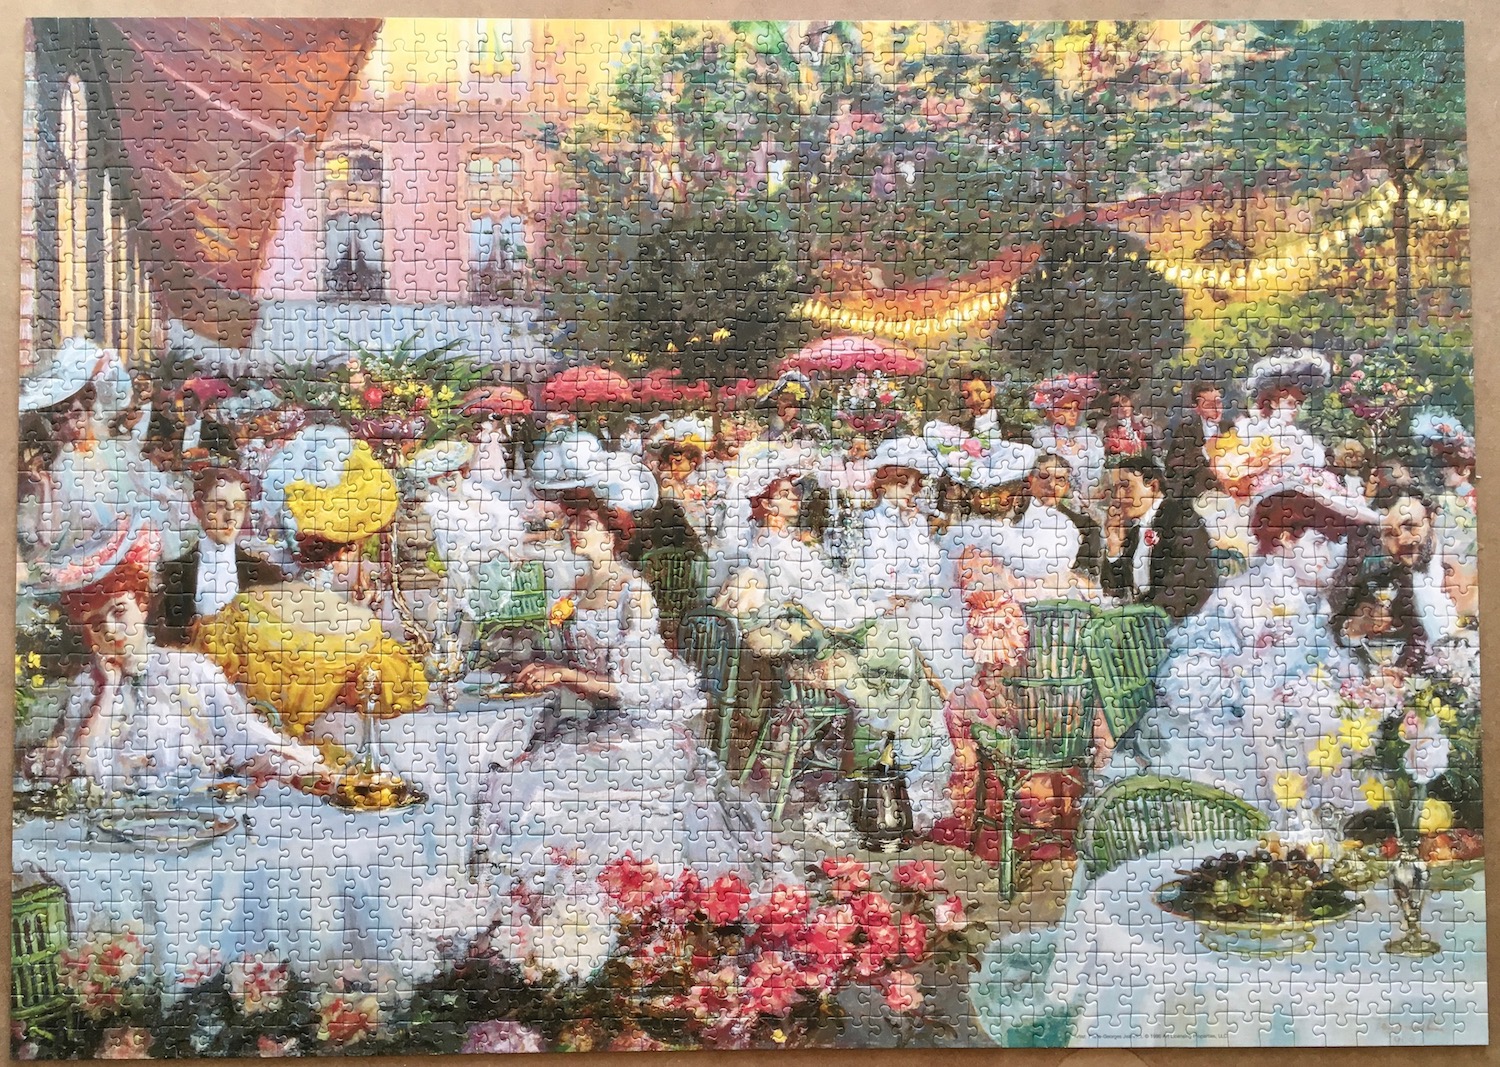 Image of the puzzle assembled 1500, Ravensburger, The Dinner at the Hotel Ritz in Paris